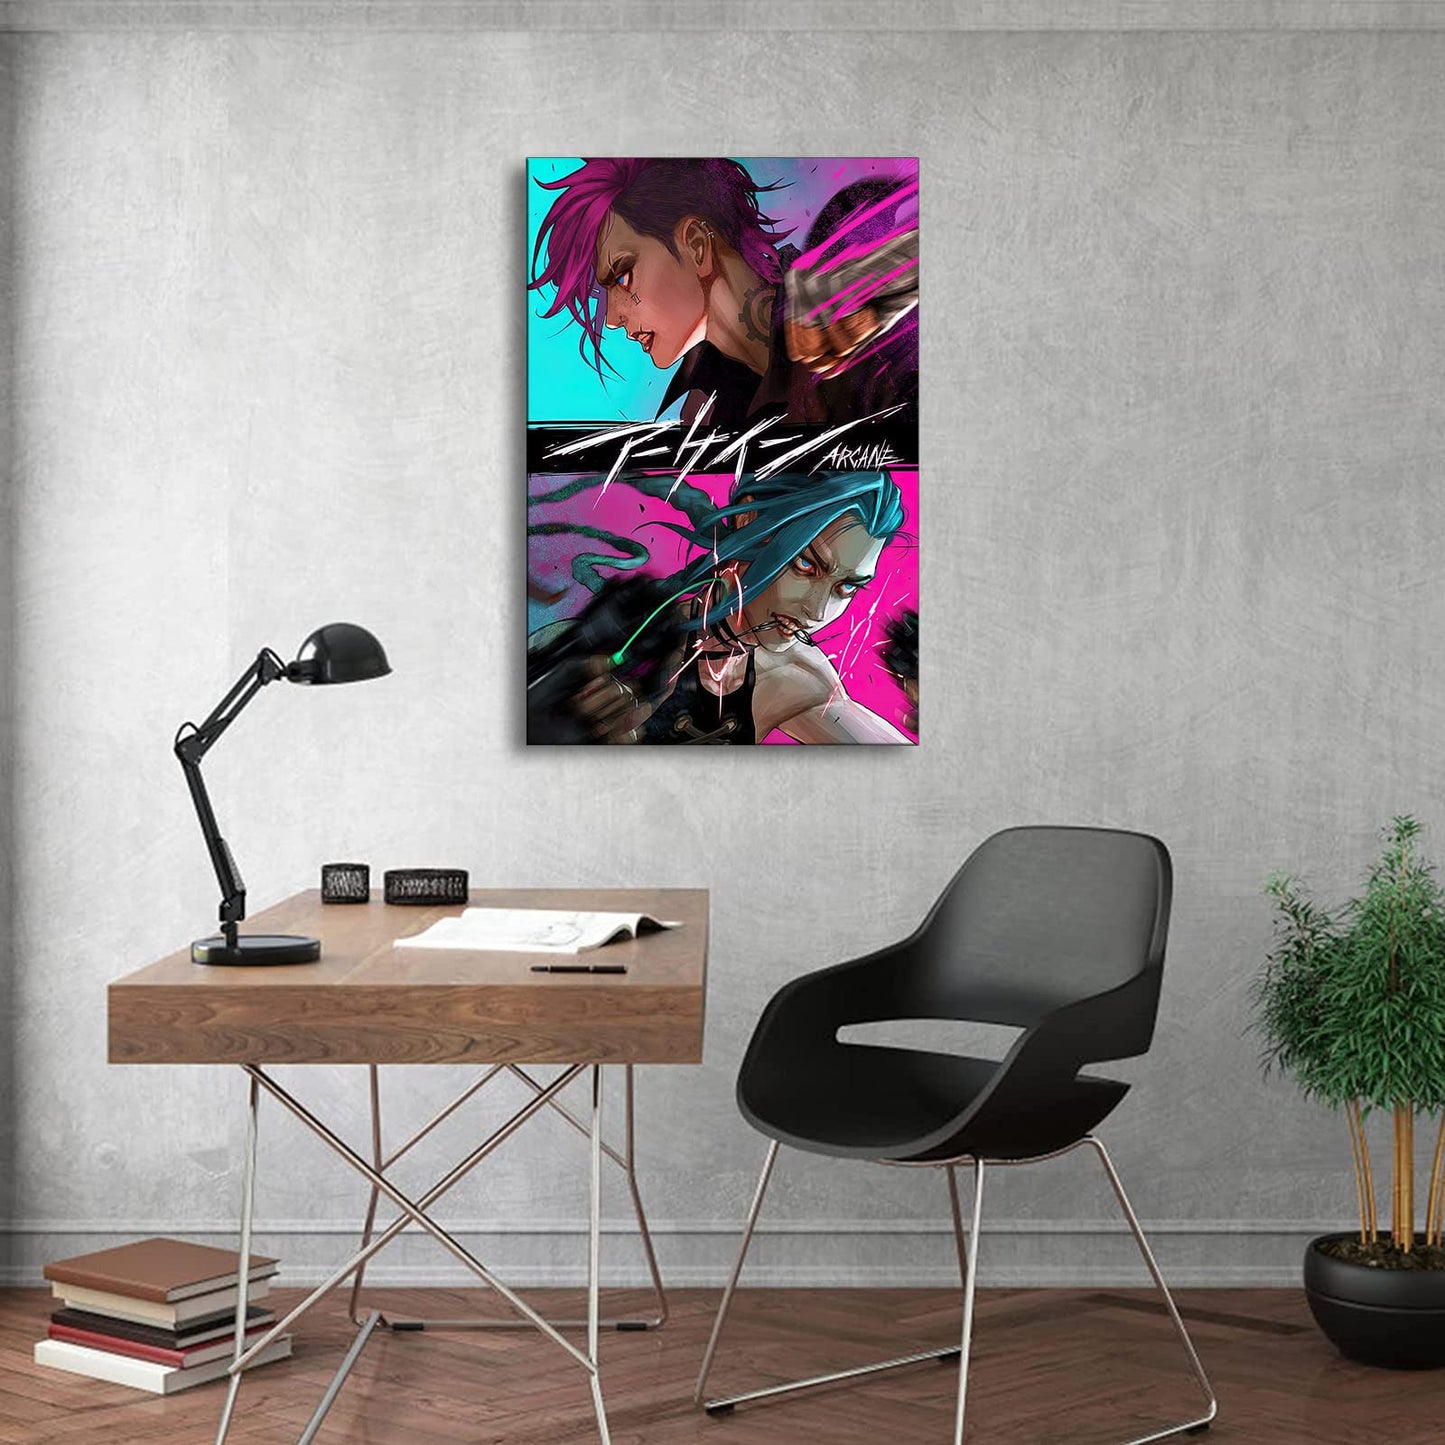 Jinx and Vi Posters Arcane Poster Anime Canvas Prints Wall Art Decor Bedroom Wall Decoration Picture - 8x12 inch Unframed